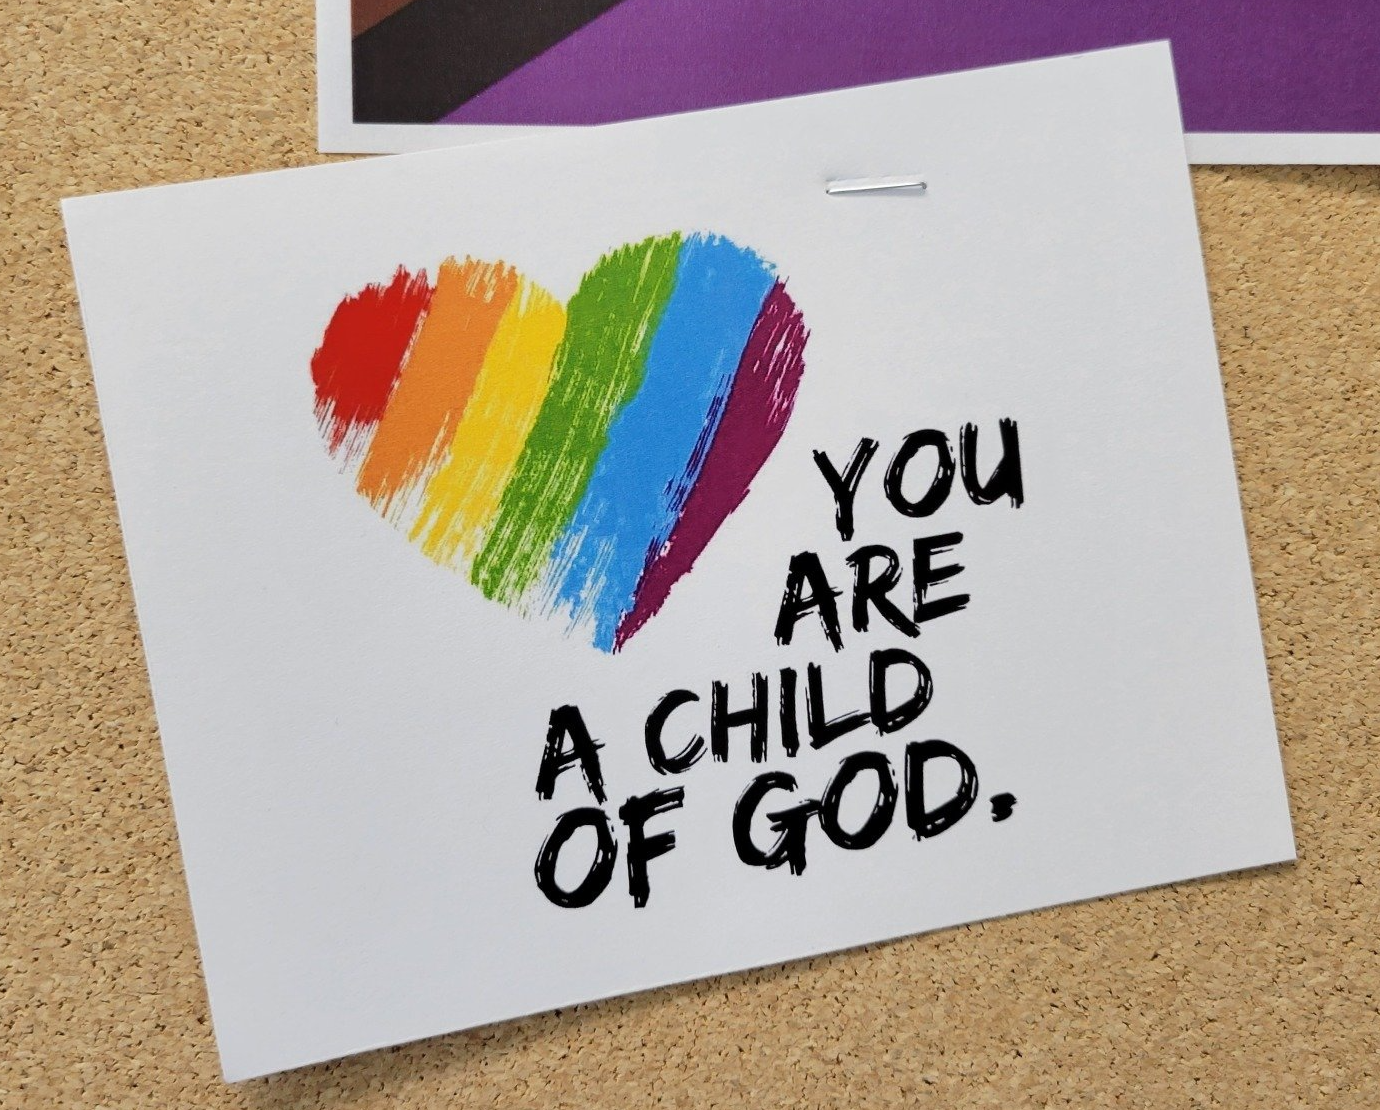 A card stapled to a cork board. The card is white with a rainbow heart and text reading 